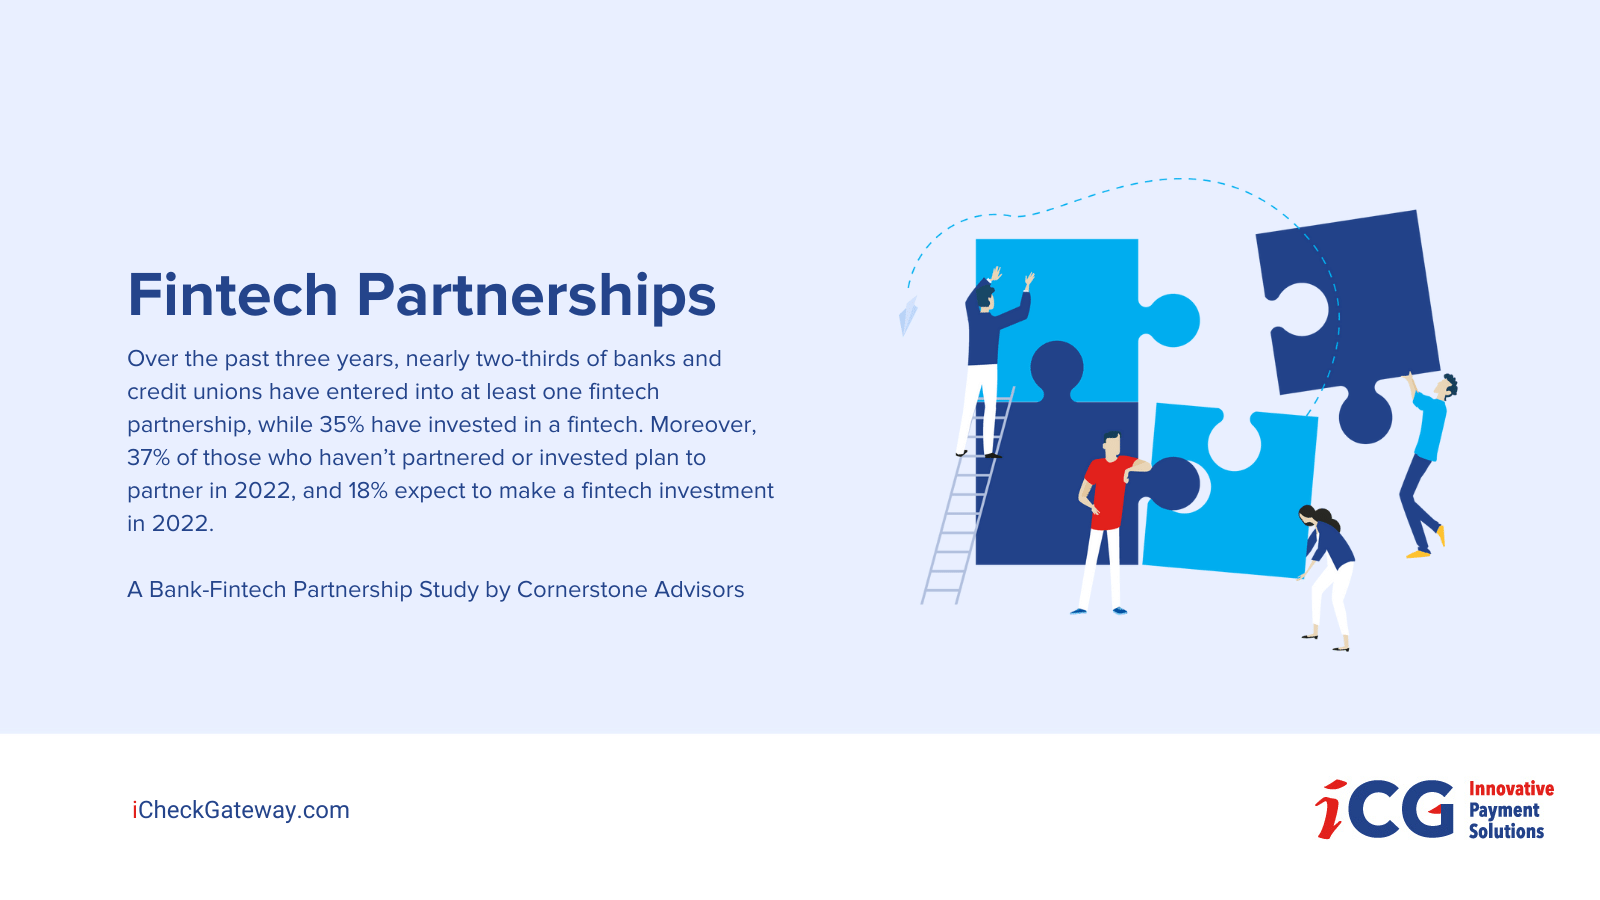 Over the past three years, nearly two-thirds of banks and credit unions have entered into at least one fintech partnership, while 35% have invested in a fintech. Moreover, 37% of those who haven’t partnered or invested plan to partner in 2022, and 18% expect to make a fintech investment in 2022.  A Bank-Fintech Partnership Study by Cornerstone Advisors 